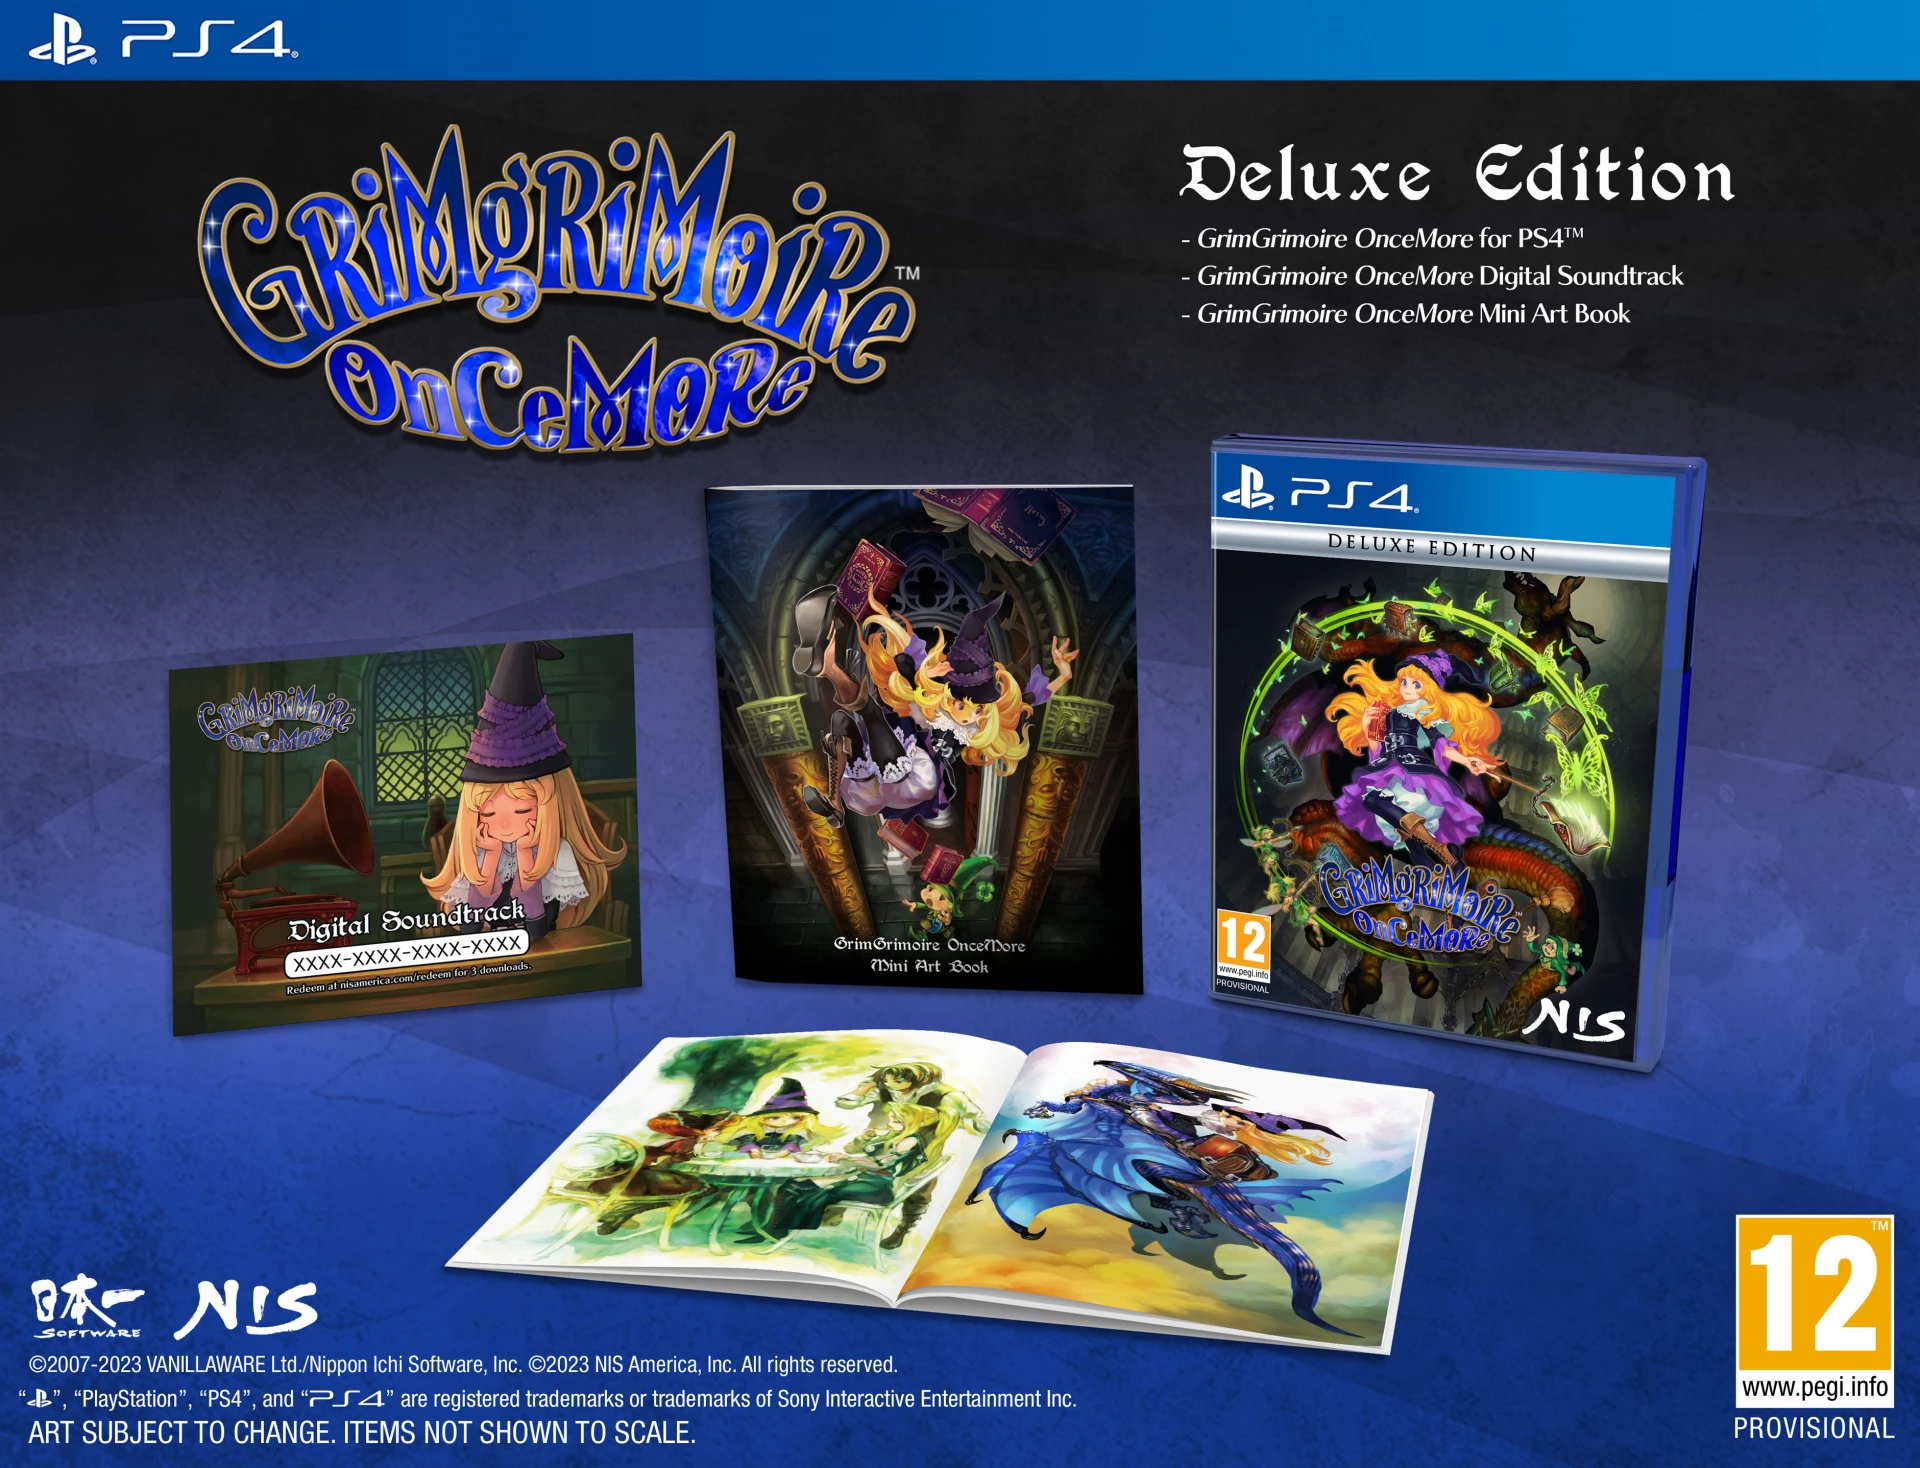 GrimGrimoire OnceMore - Deluxe Edition (PS4), NIS America